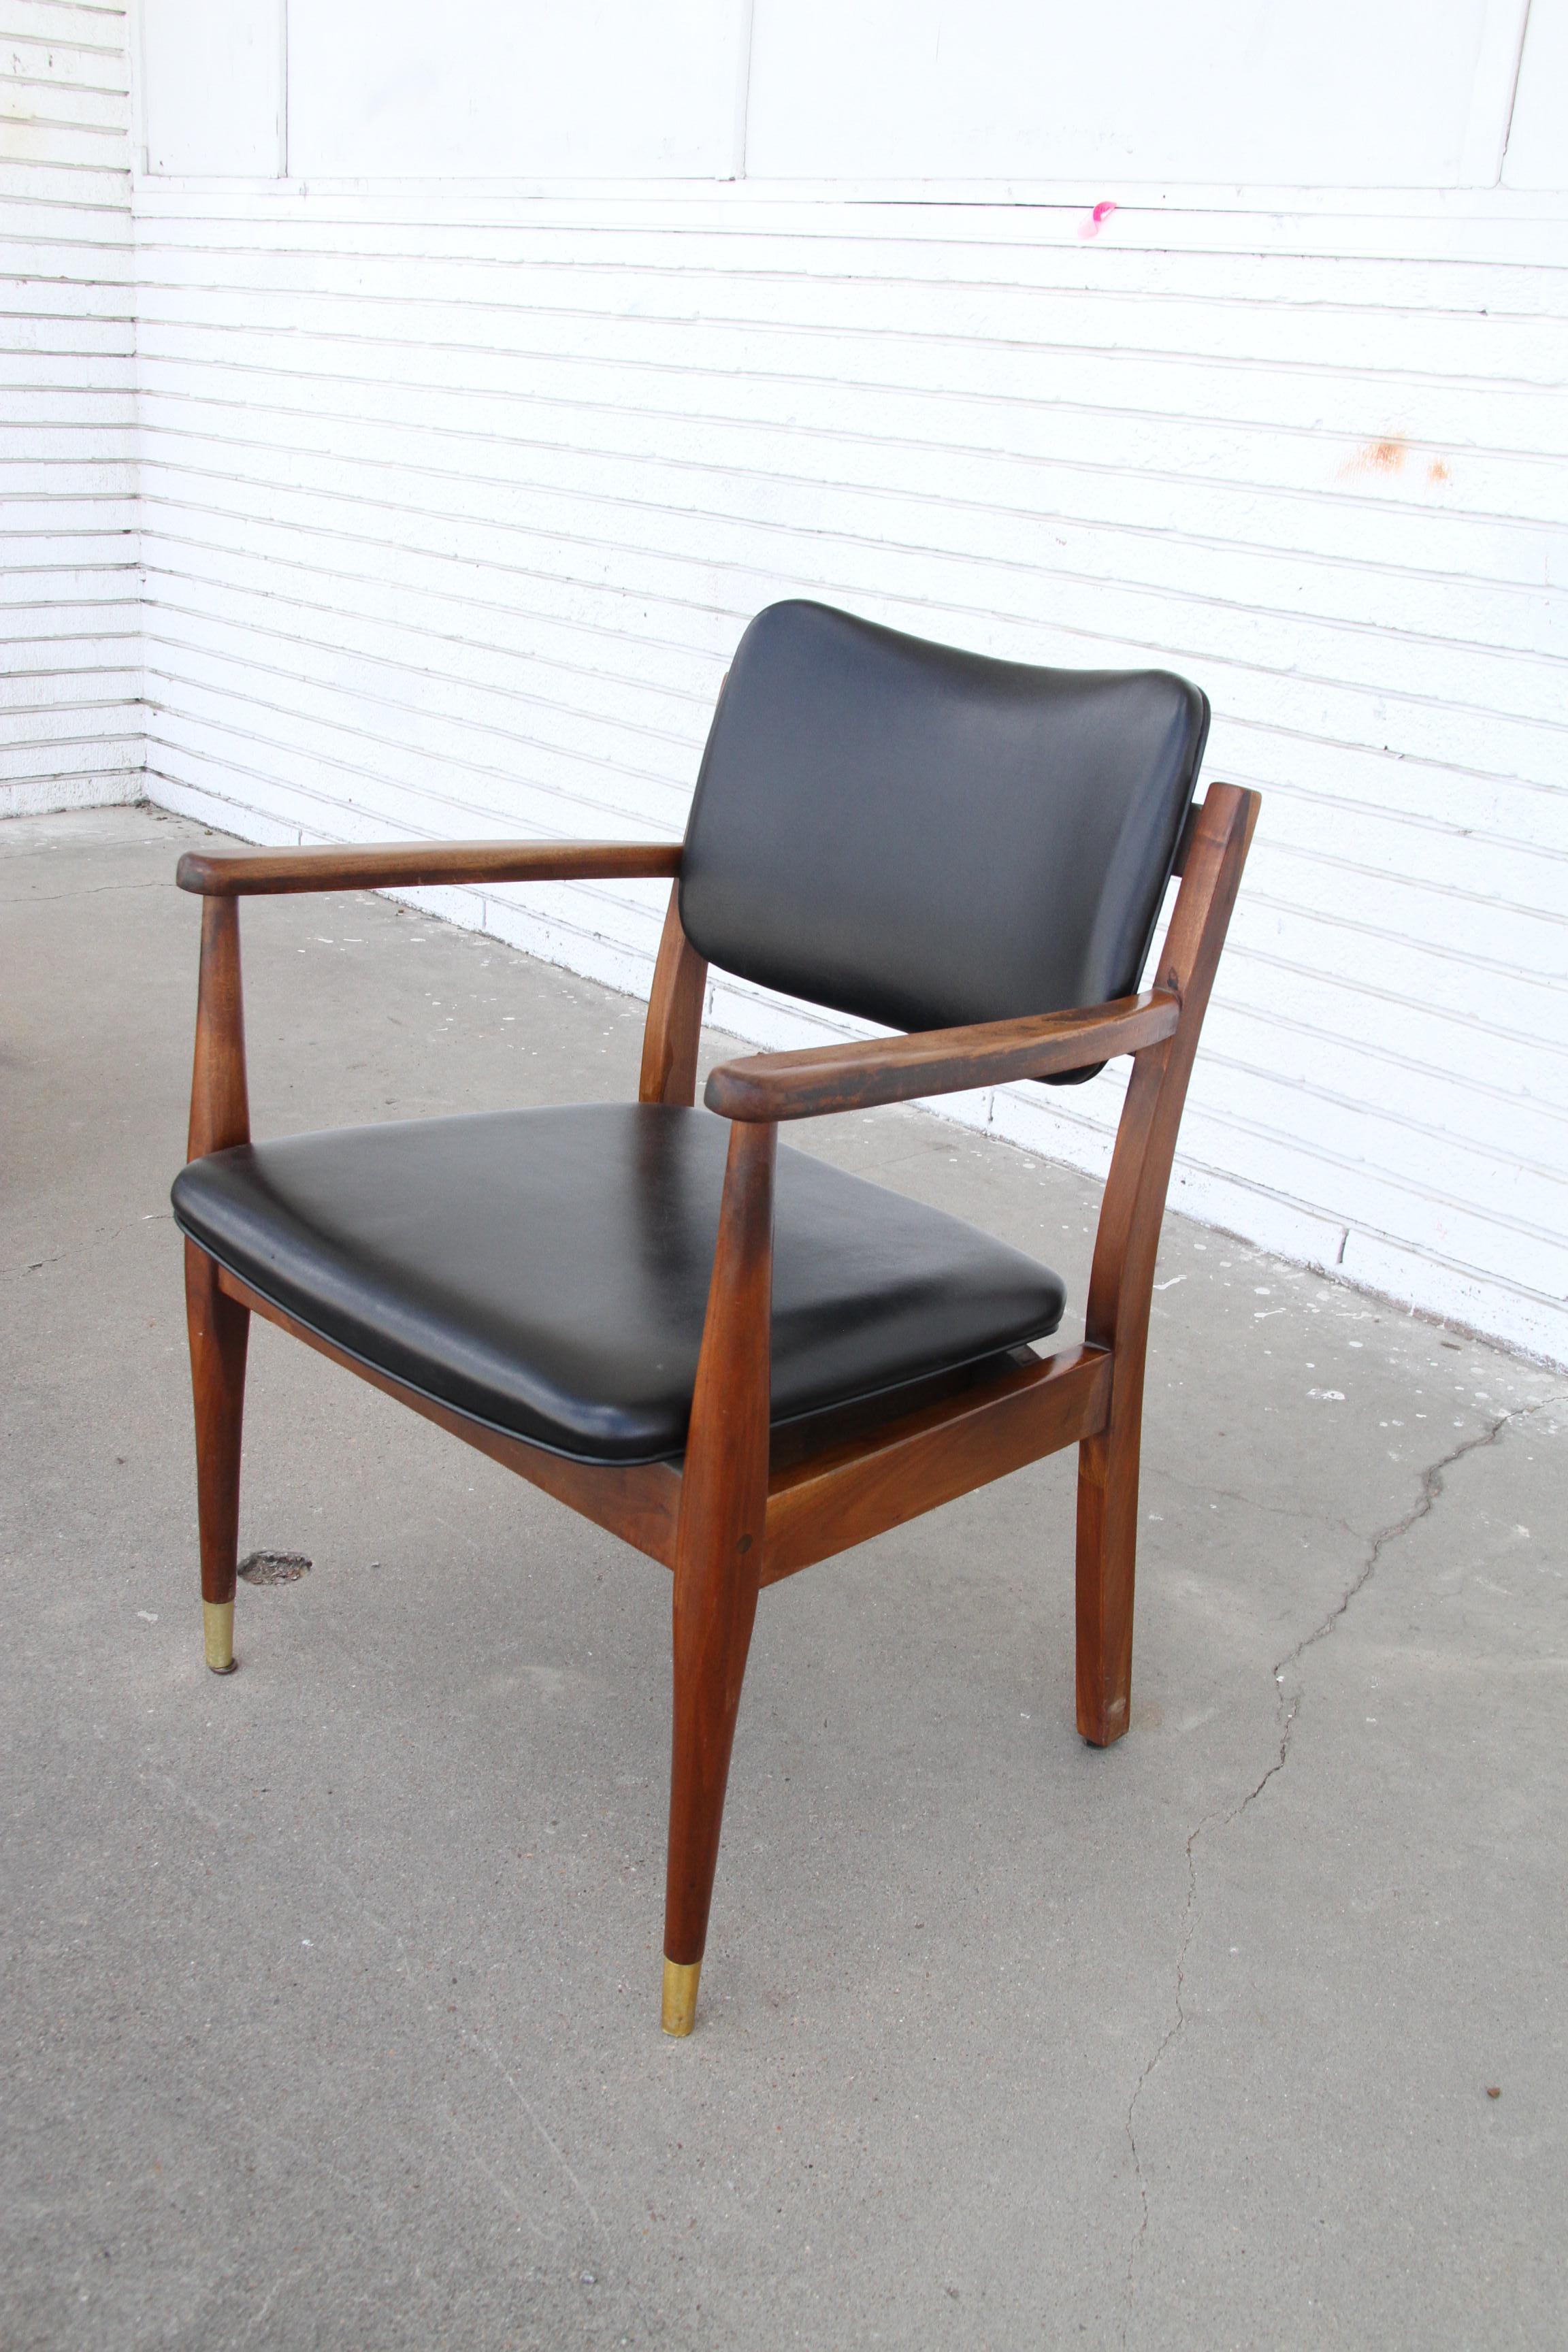 Pair of Mid Century Side Guest Chairs by Gregson

Mid century modern pair of arm chairs with walnut frames, tapered brass tipped legs, upholstered in black naugahyde, with a brass tack detail.  
Signed by Gregson Manufacturing